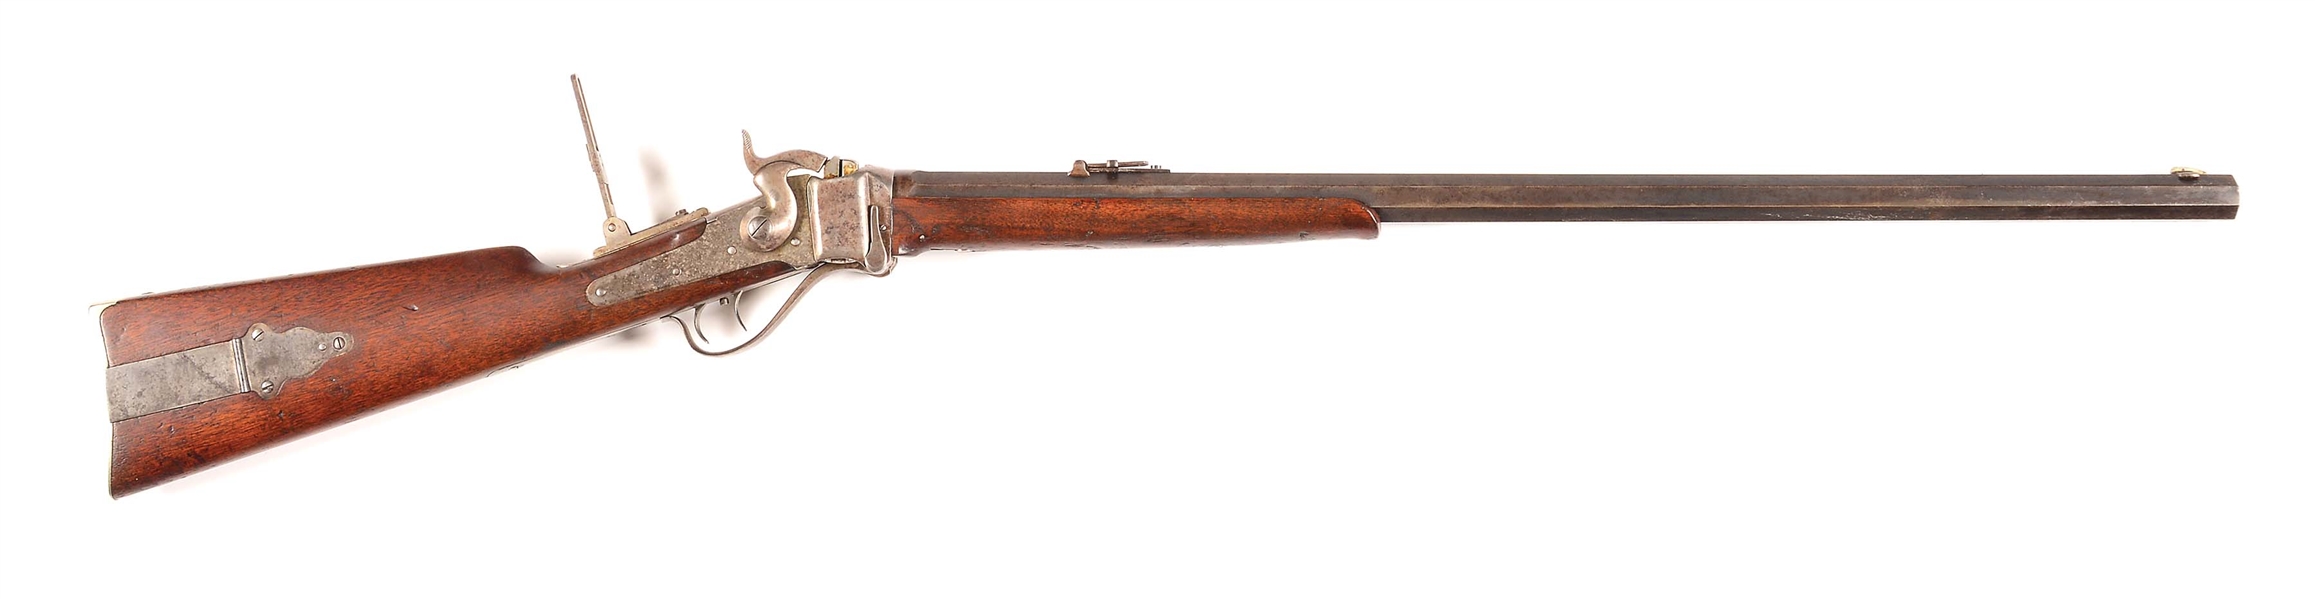 (A) "A" SERIES SHARPS "OLD RELIABLE" SINGLE SHOT RIFLE.